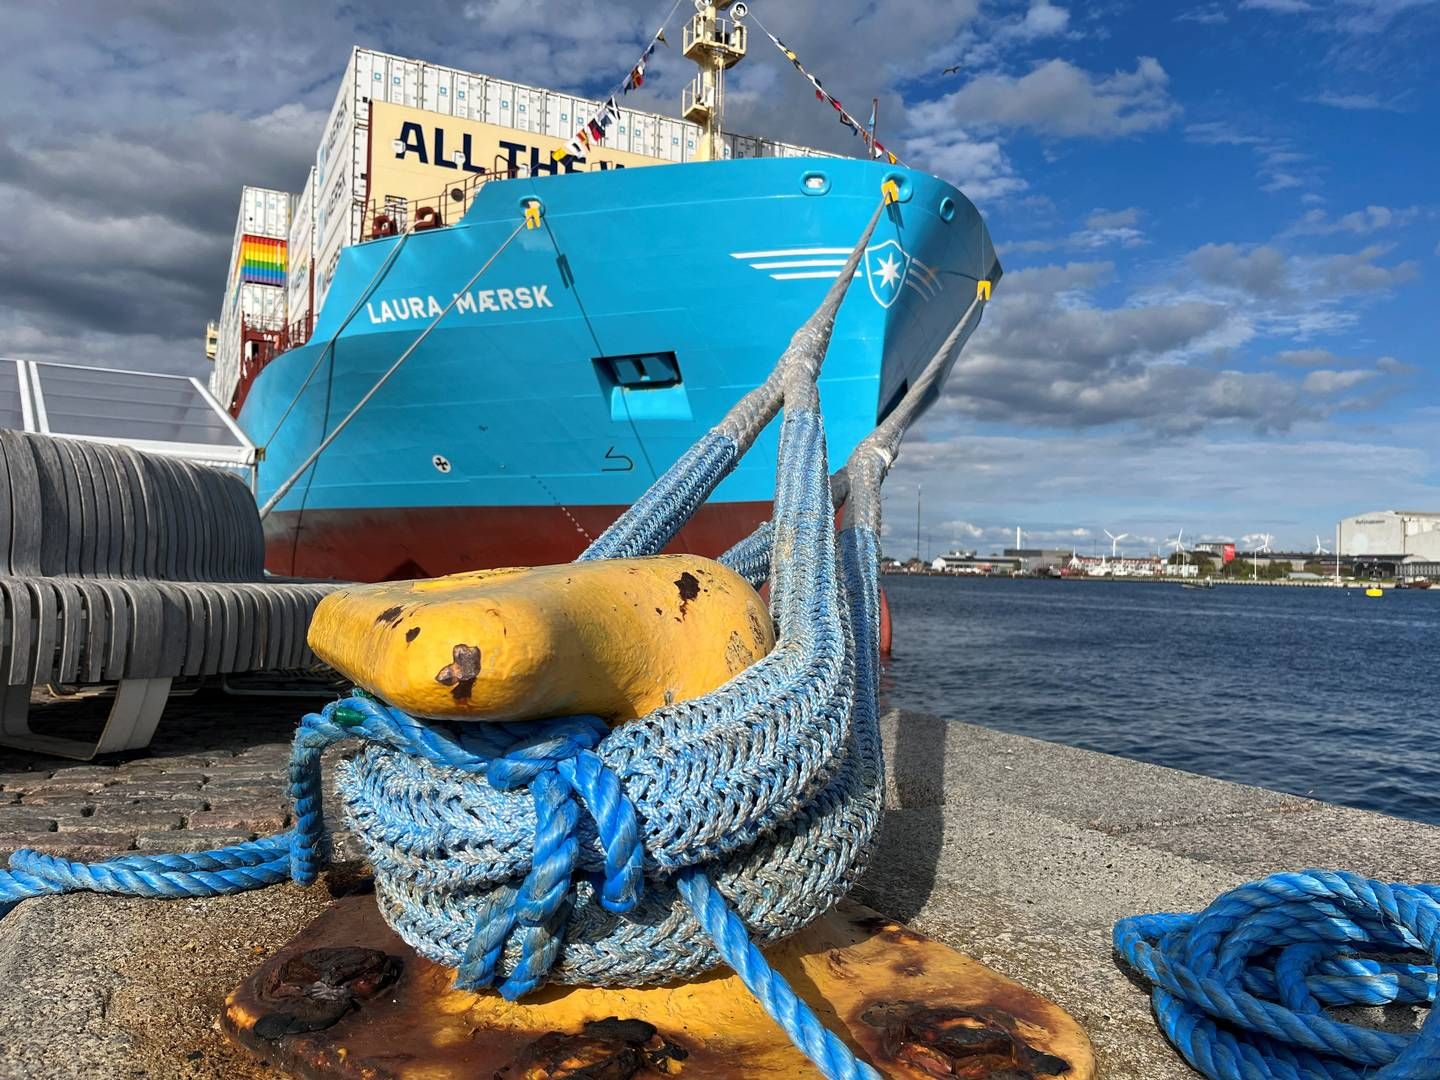 In September this year, Laura Maersk was the first methanol ship to be named in Copenhagen. | Photo: Jacob Gronholt-Pedersen/Reuters/Ritzau Scanpix